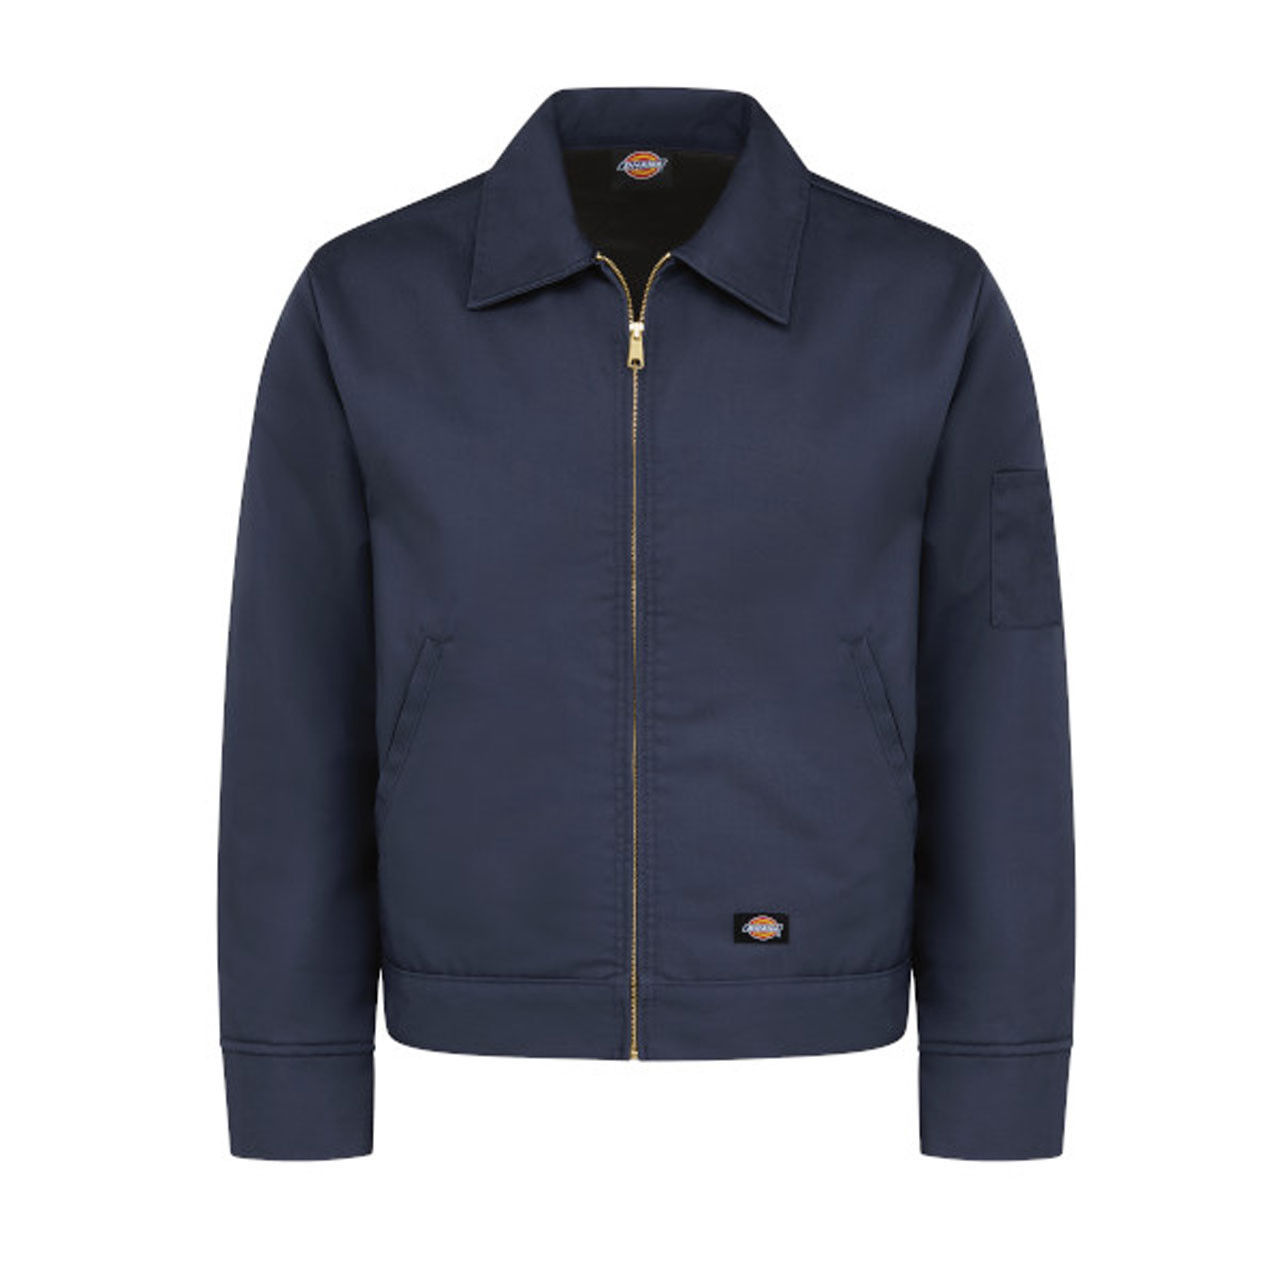 Where does the Dickies jacket mens ship from?